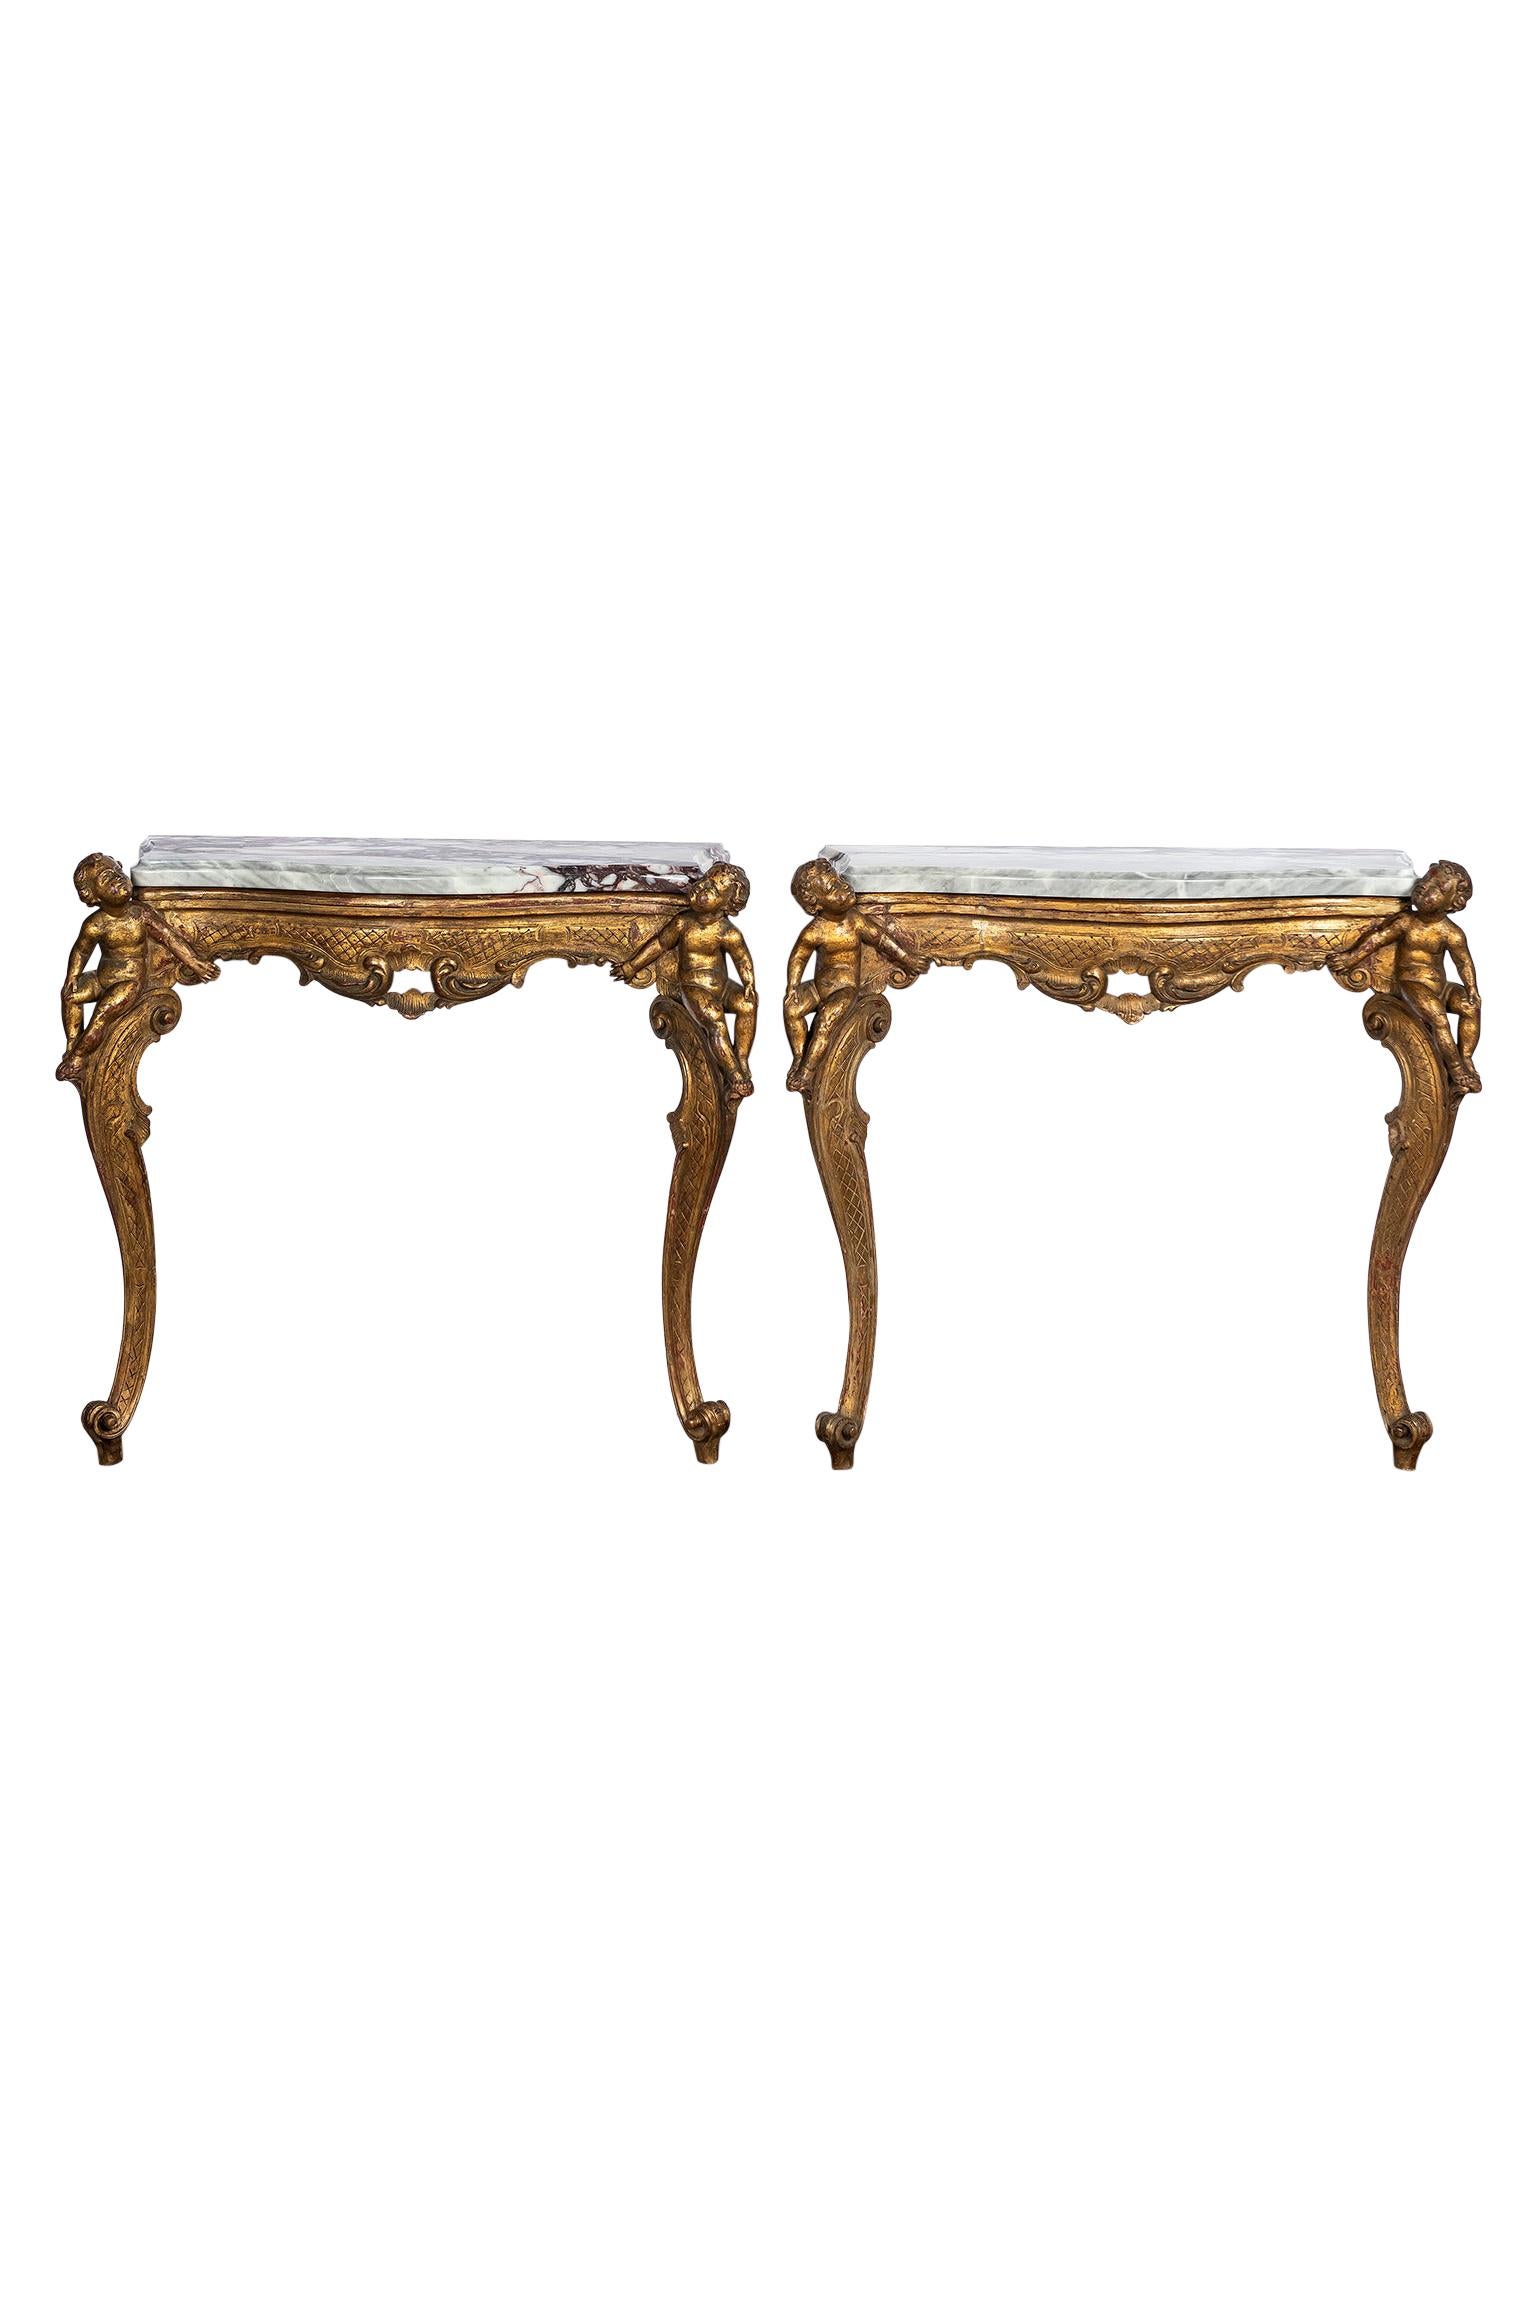 Pair of Giltwood and Breccia Marble Consoles, Italy, circa Mid-19th Century